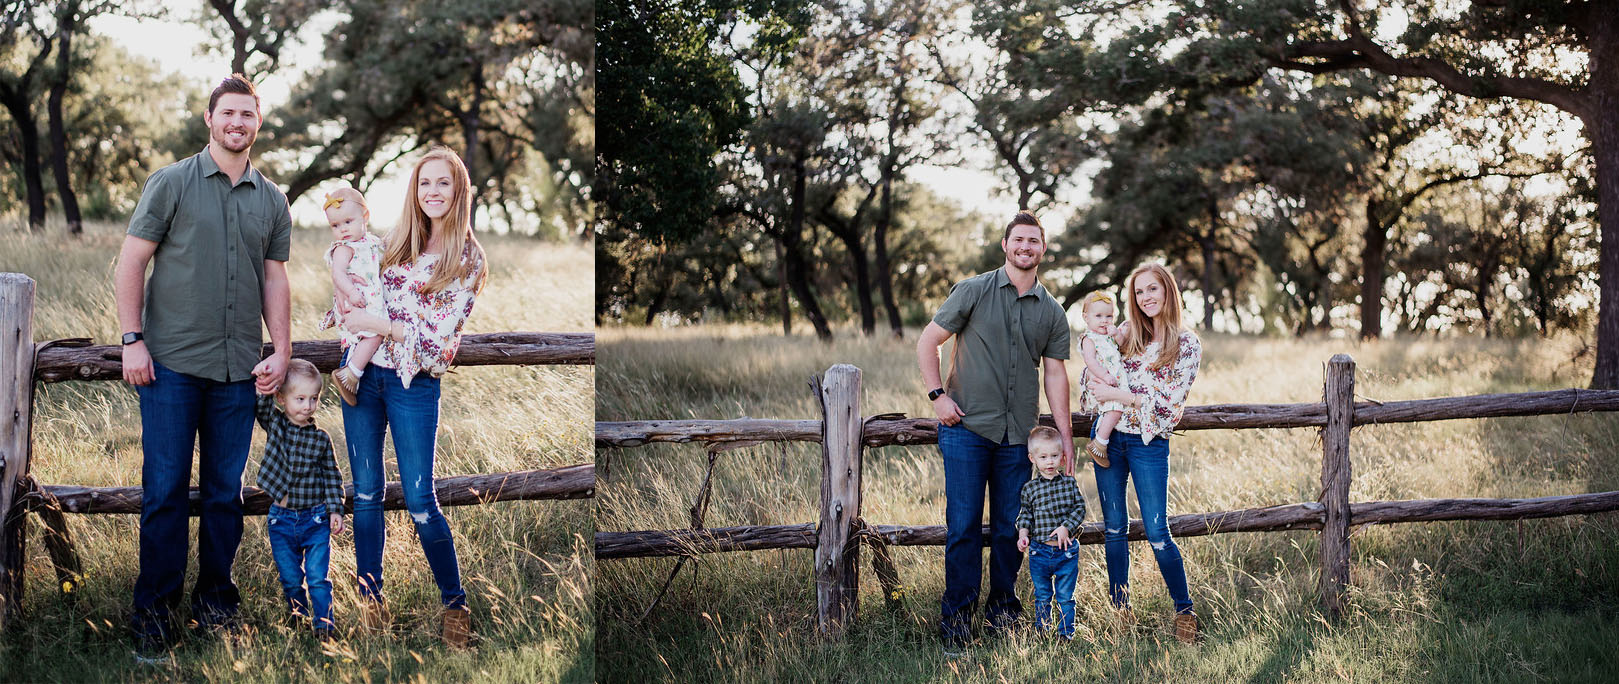 EffJay Photography Lees Summit Family Photographer Natural Light Lifestyle Session023.jpg